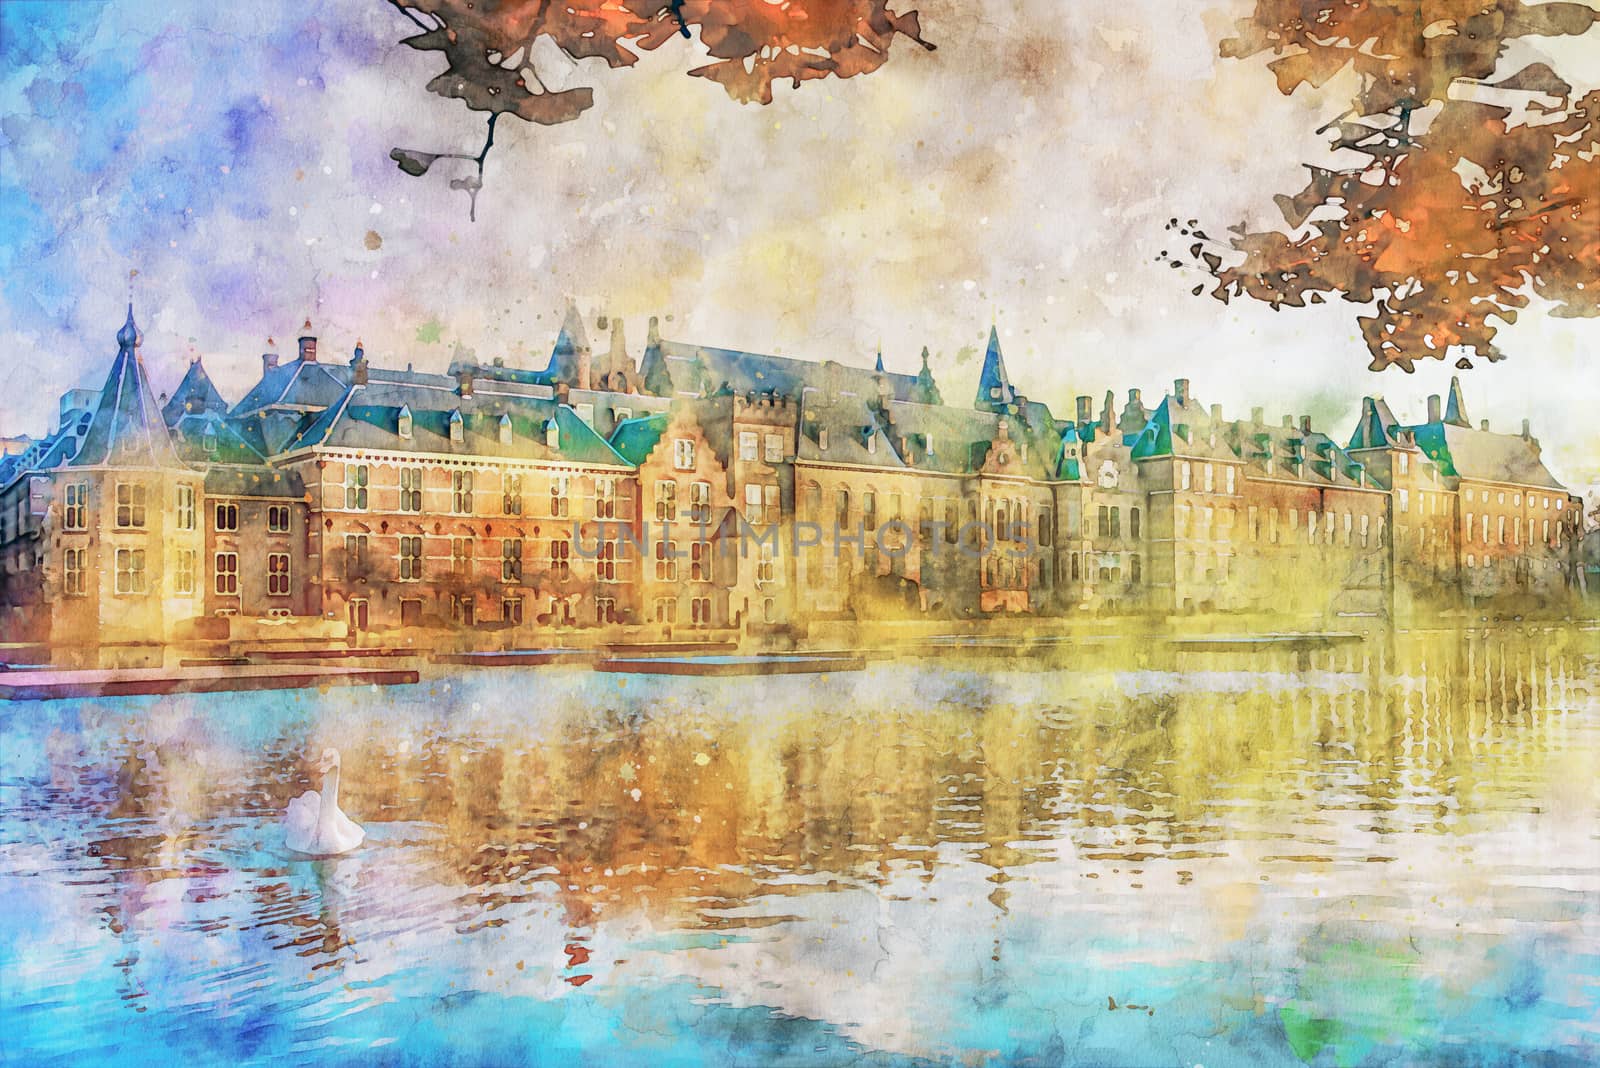 Sunset on the Binnenhof building and The Hague city reflected on by ankorlight